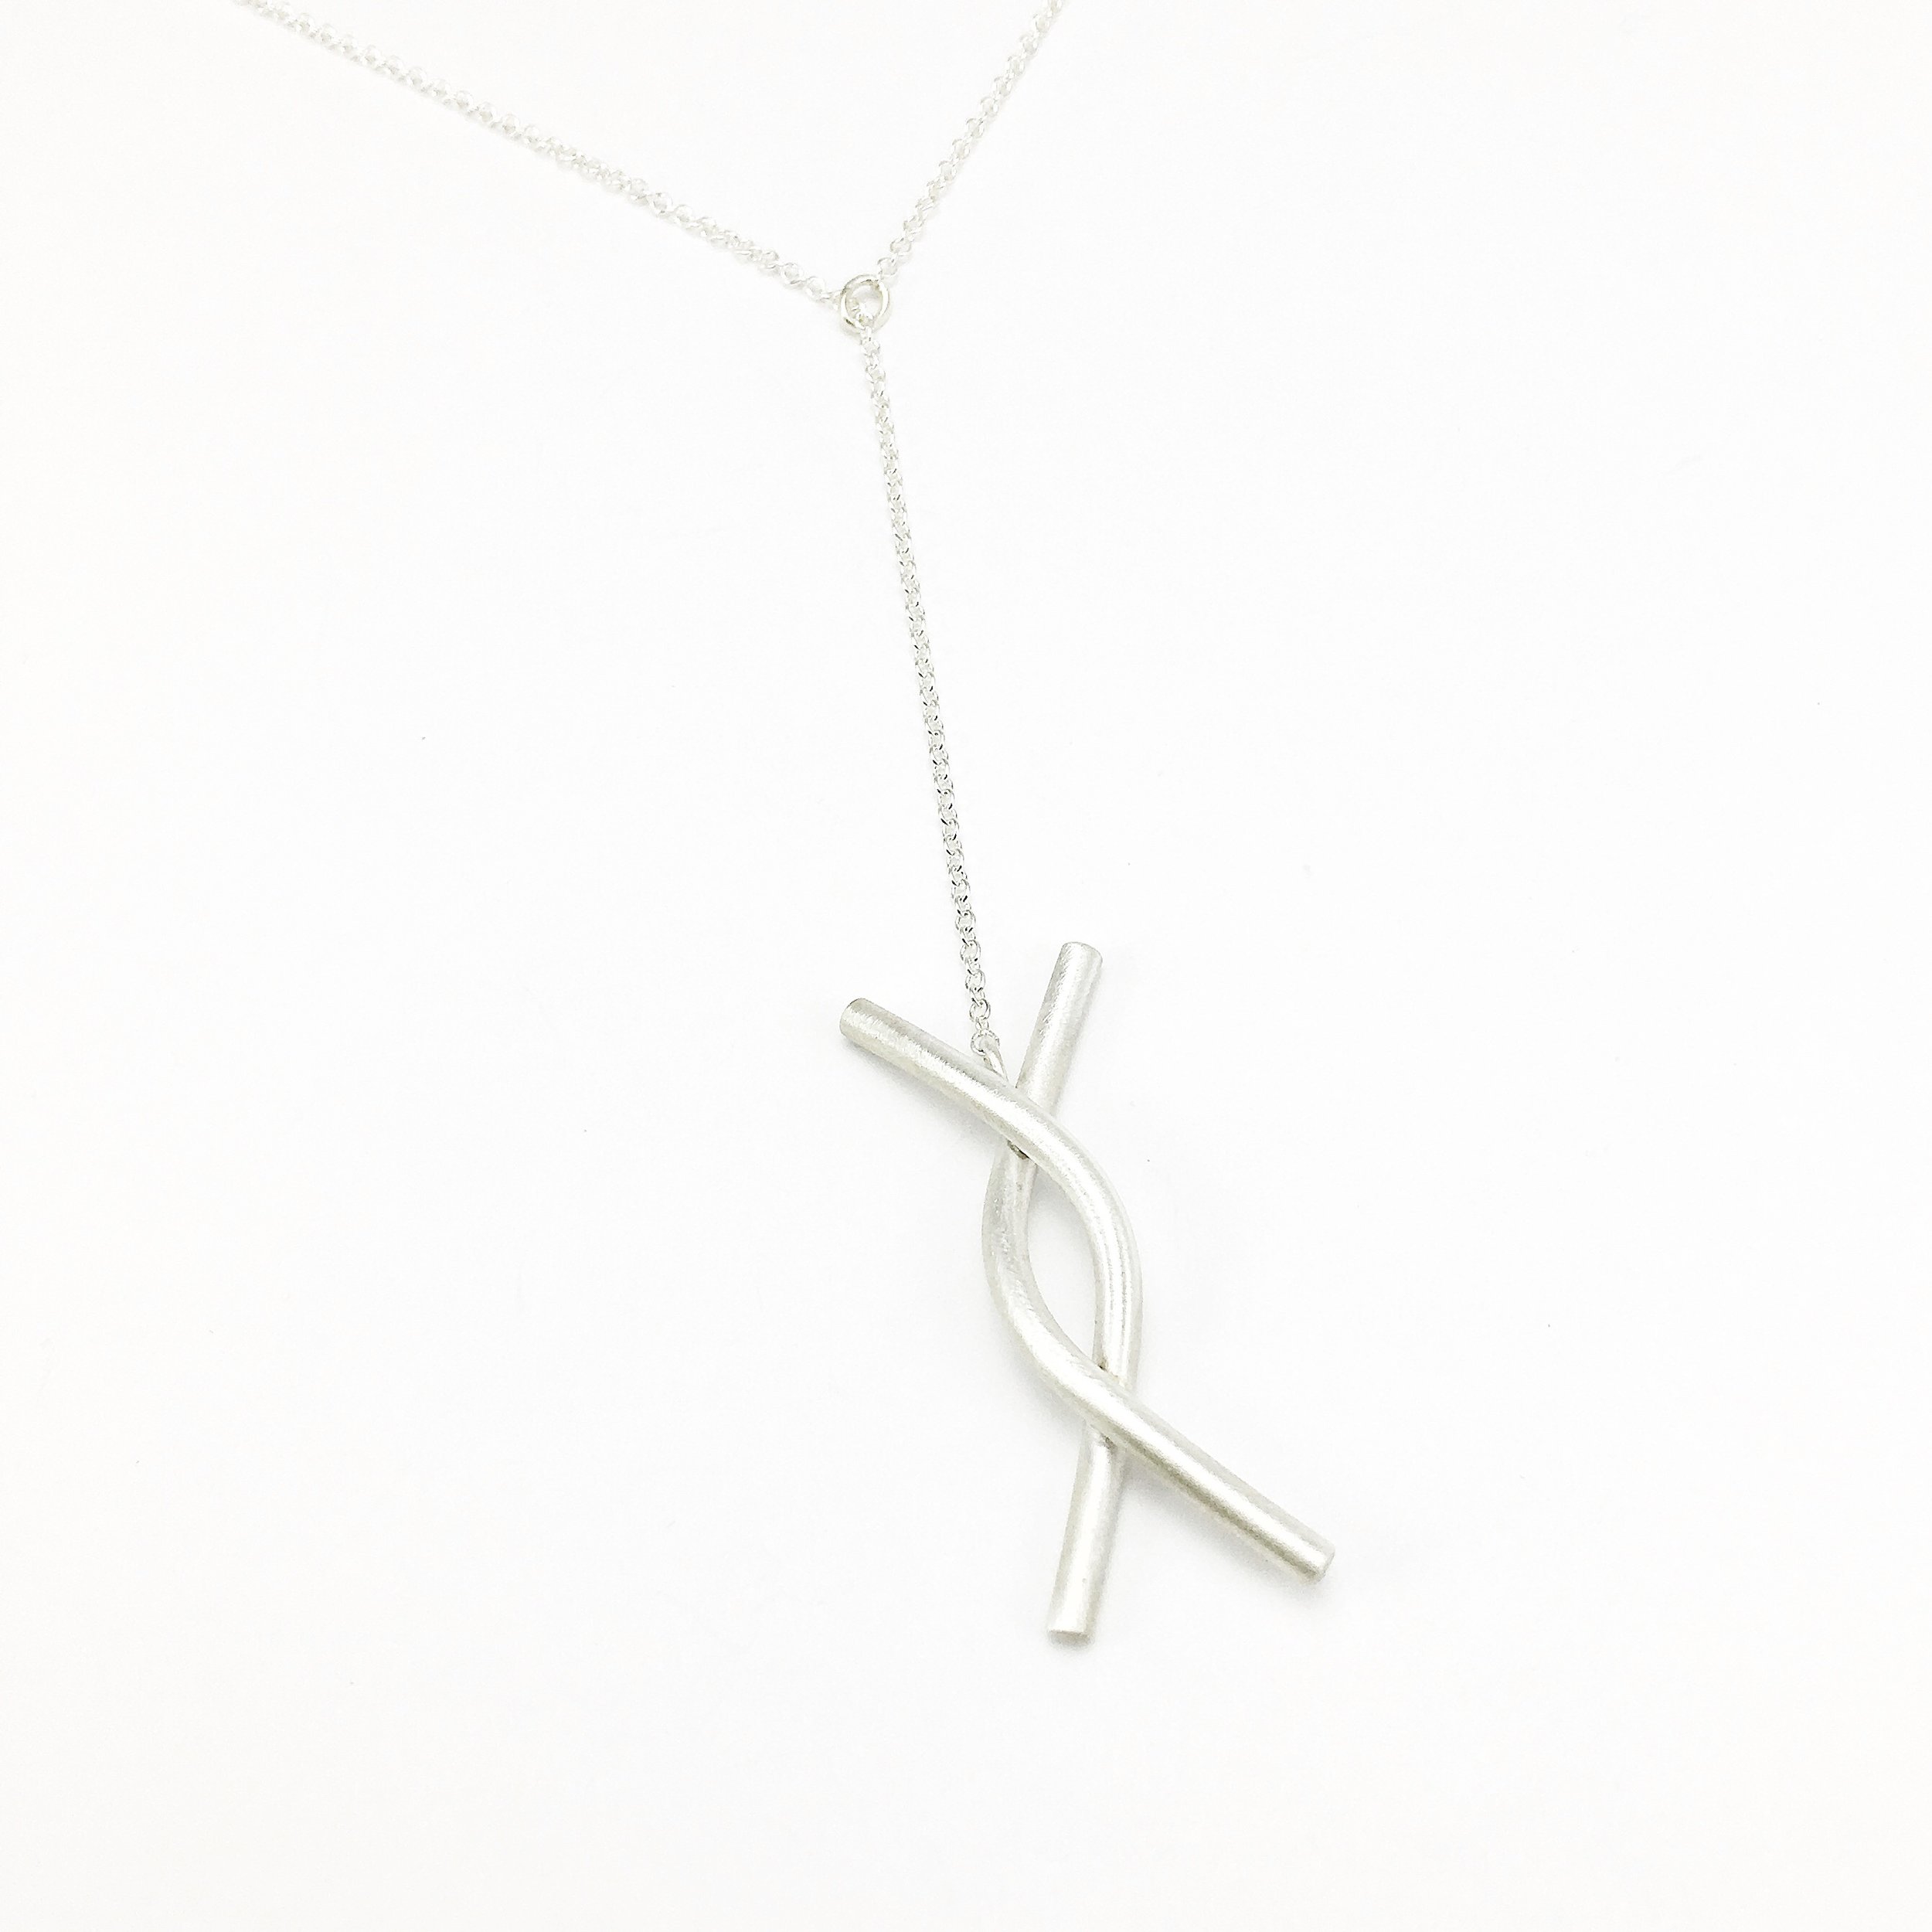 twirl lariat necklace in frosted sterling silver